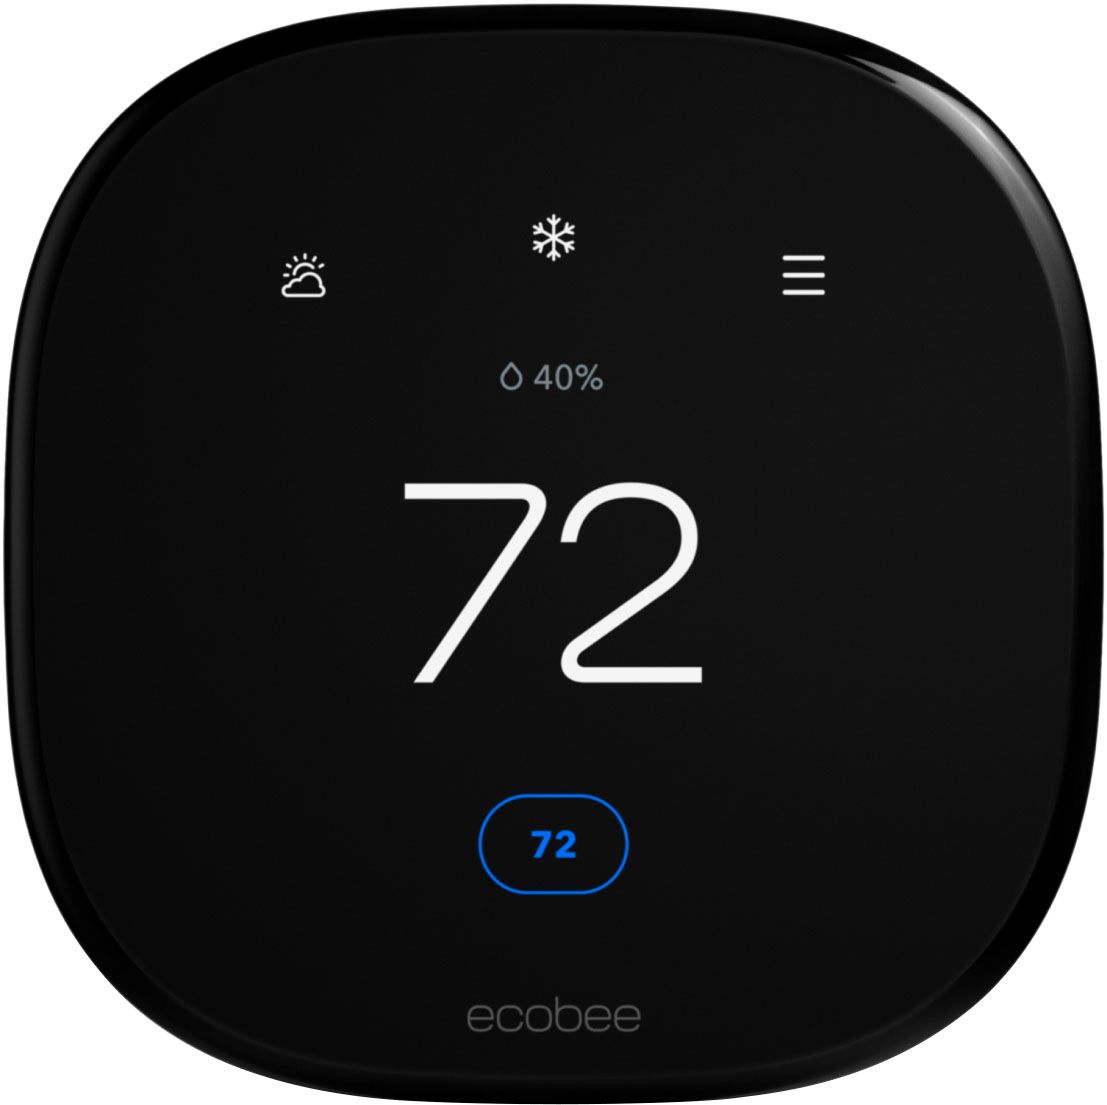 A snazzy new UI and design alongside a larger touchscreen give Ecobee's new mid-tier smart thermostat plenty to offer inside your smart home.